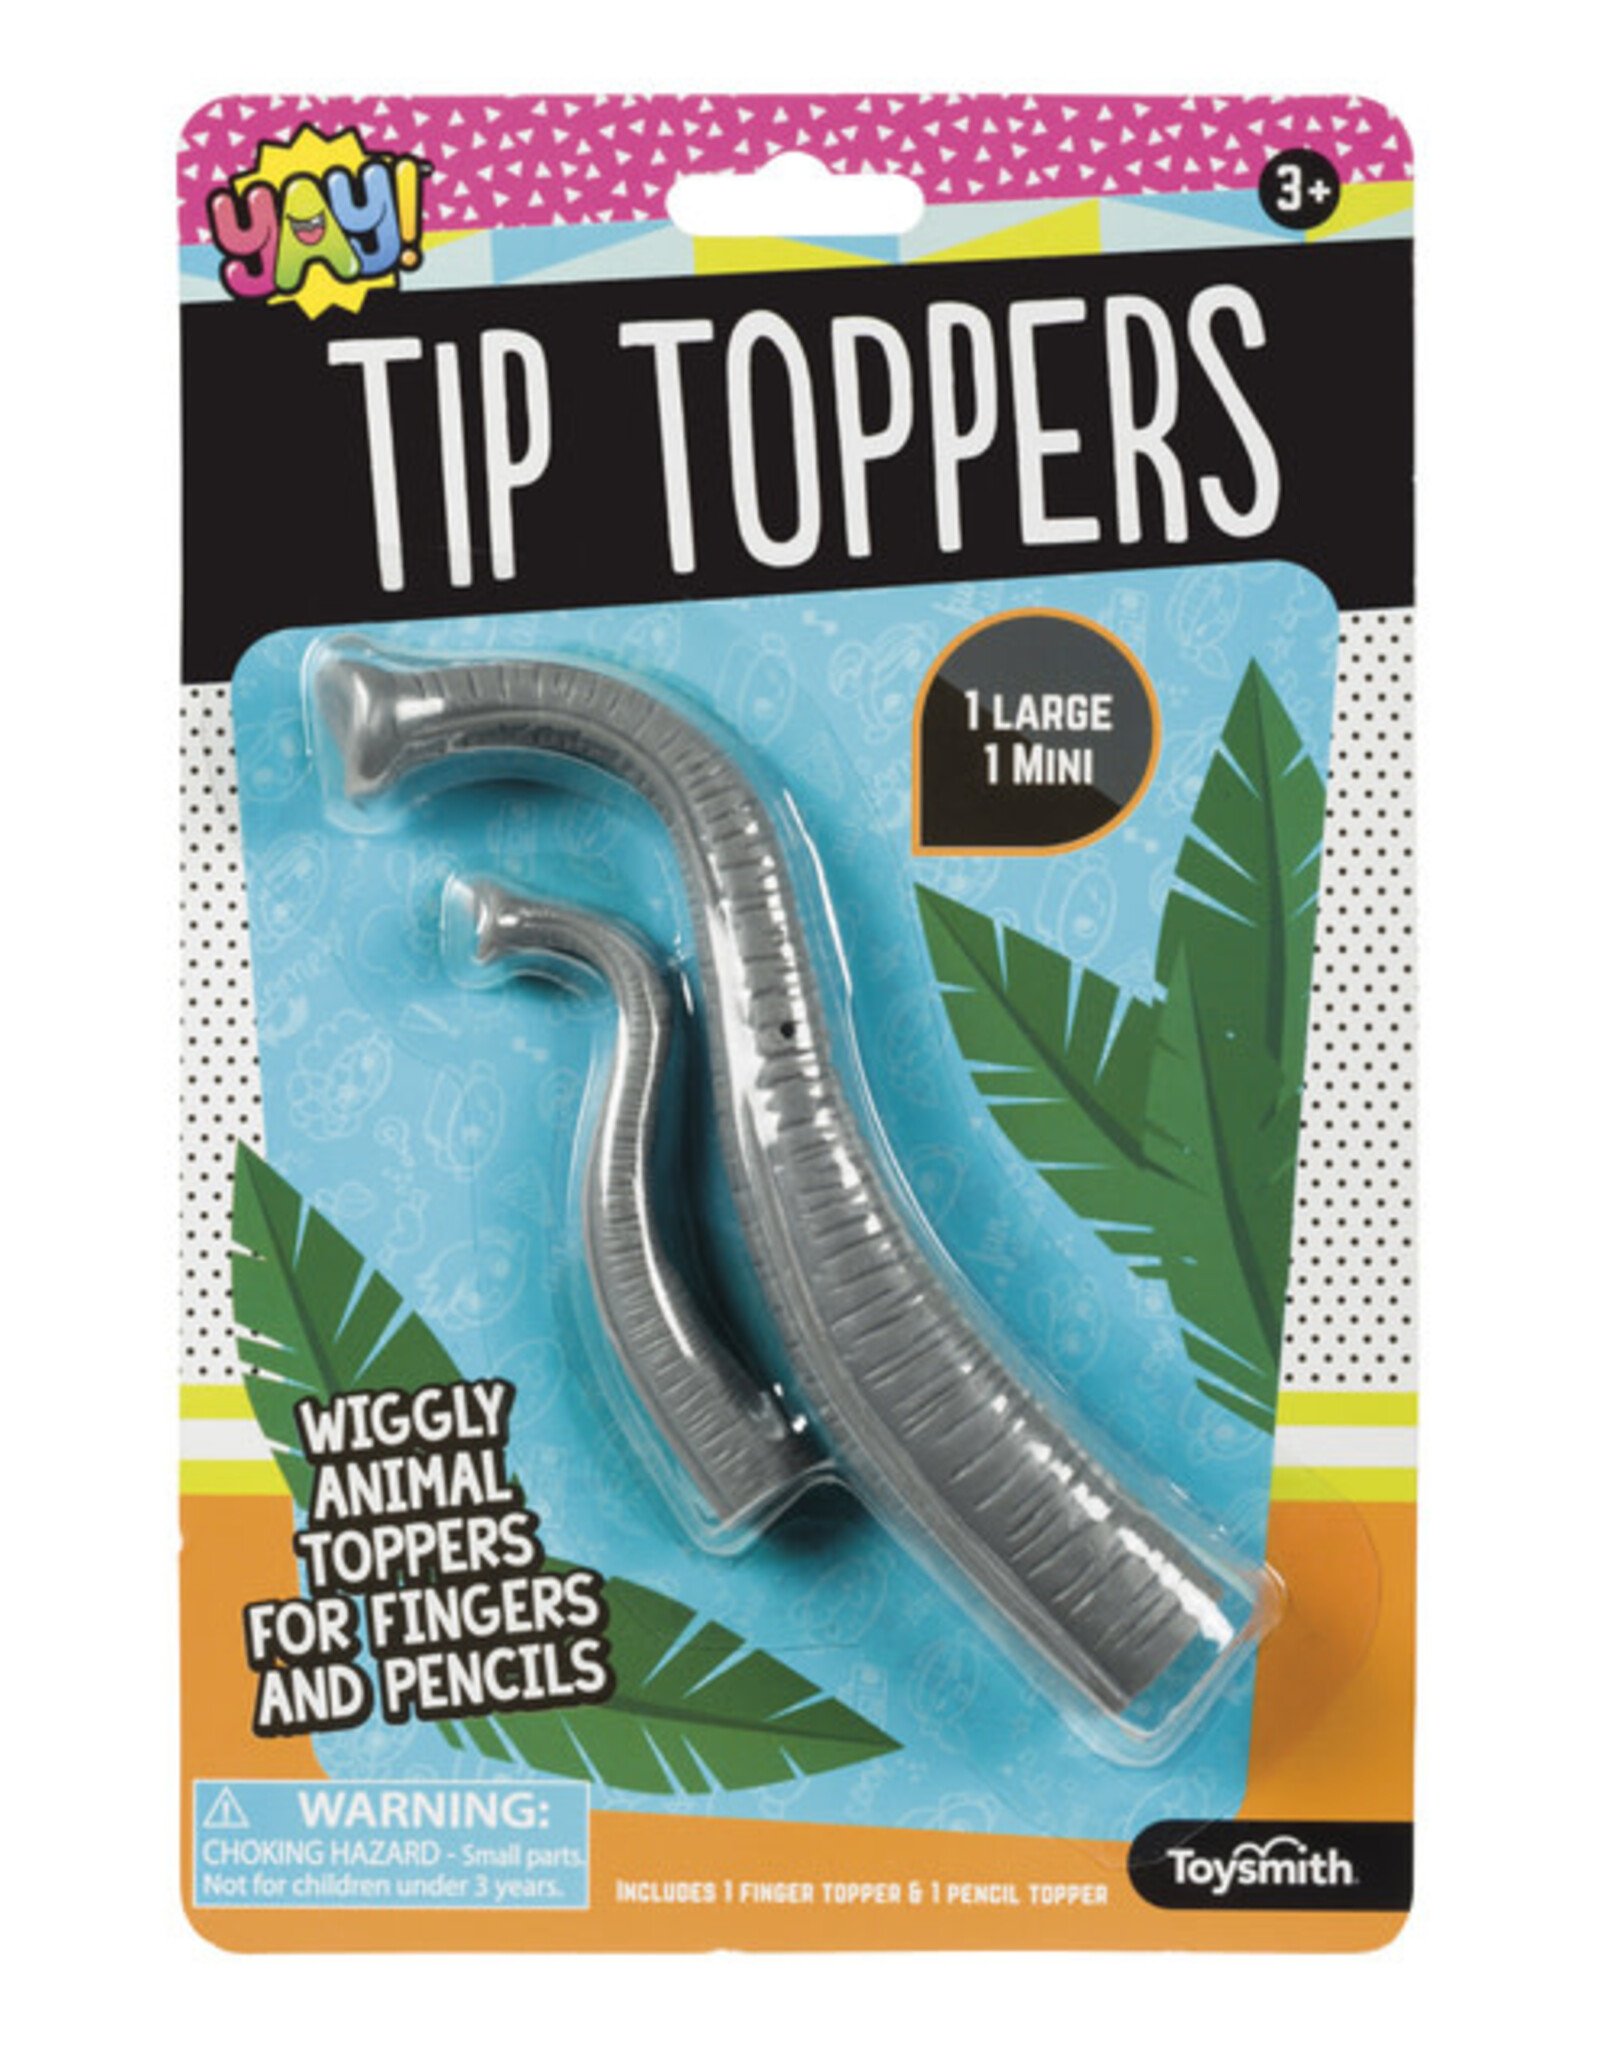 Toysmith Tip Toppers - YAY